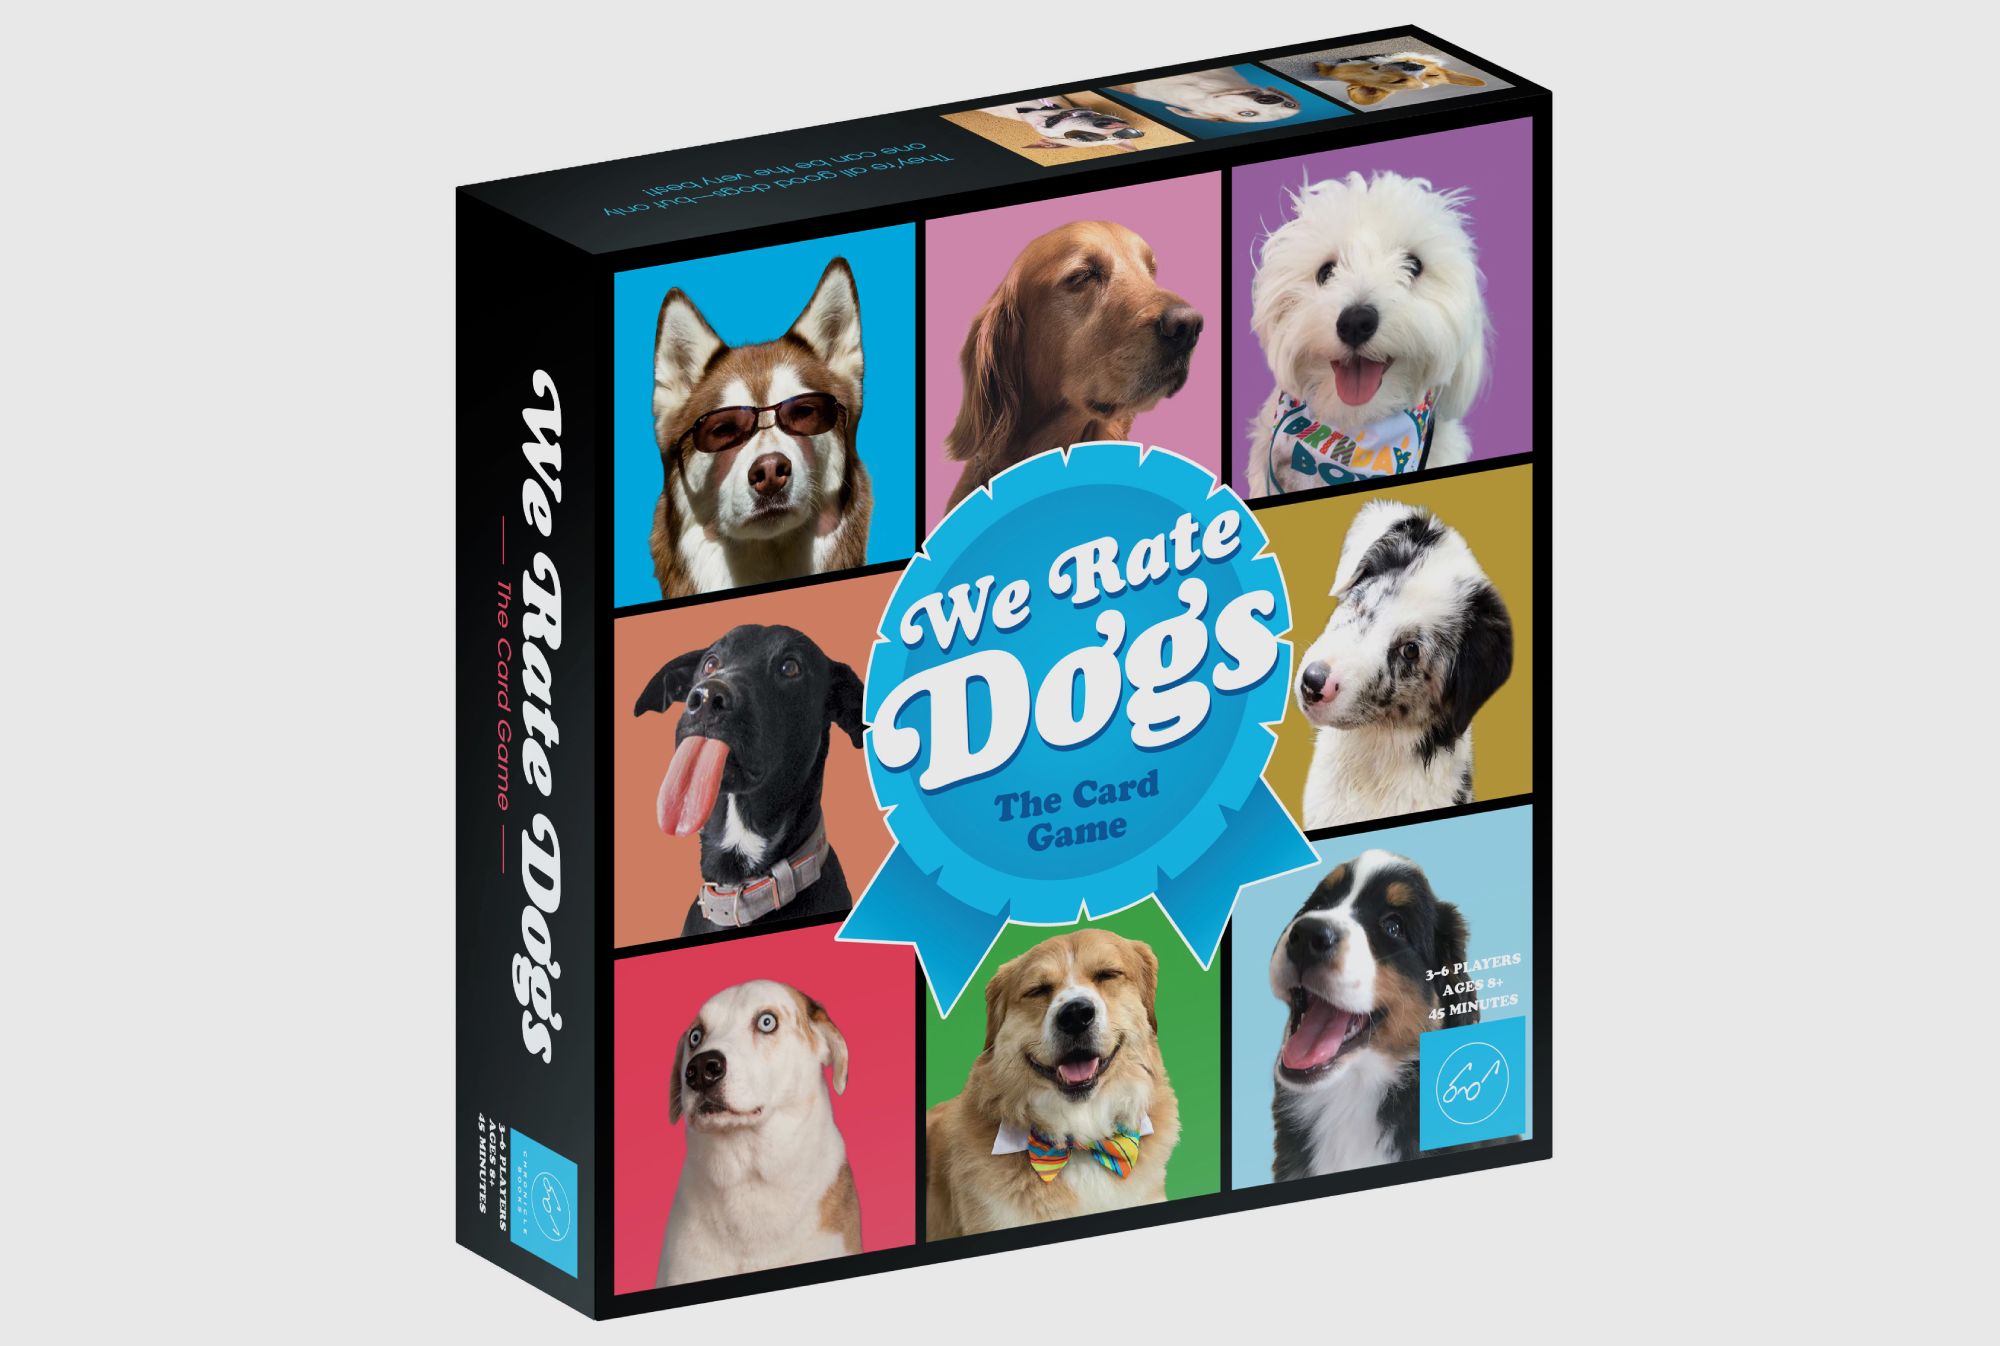 It S A Good Game Brent Weratedogs Is Now A Card Game Mental Floss With a quick, slight alteration of the url, you can watch videos uninterrupted. it s a good game brent weratedogs is